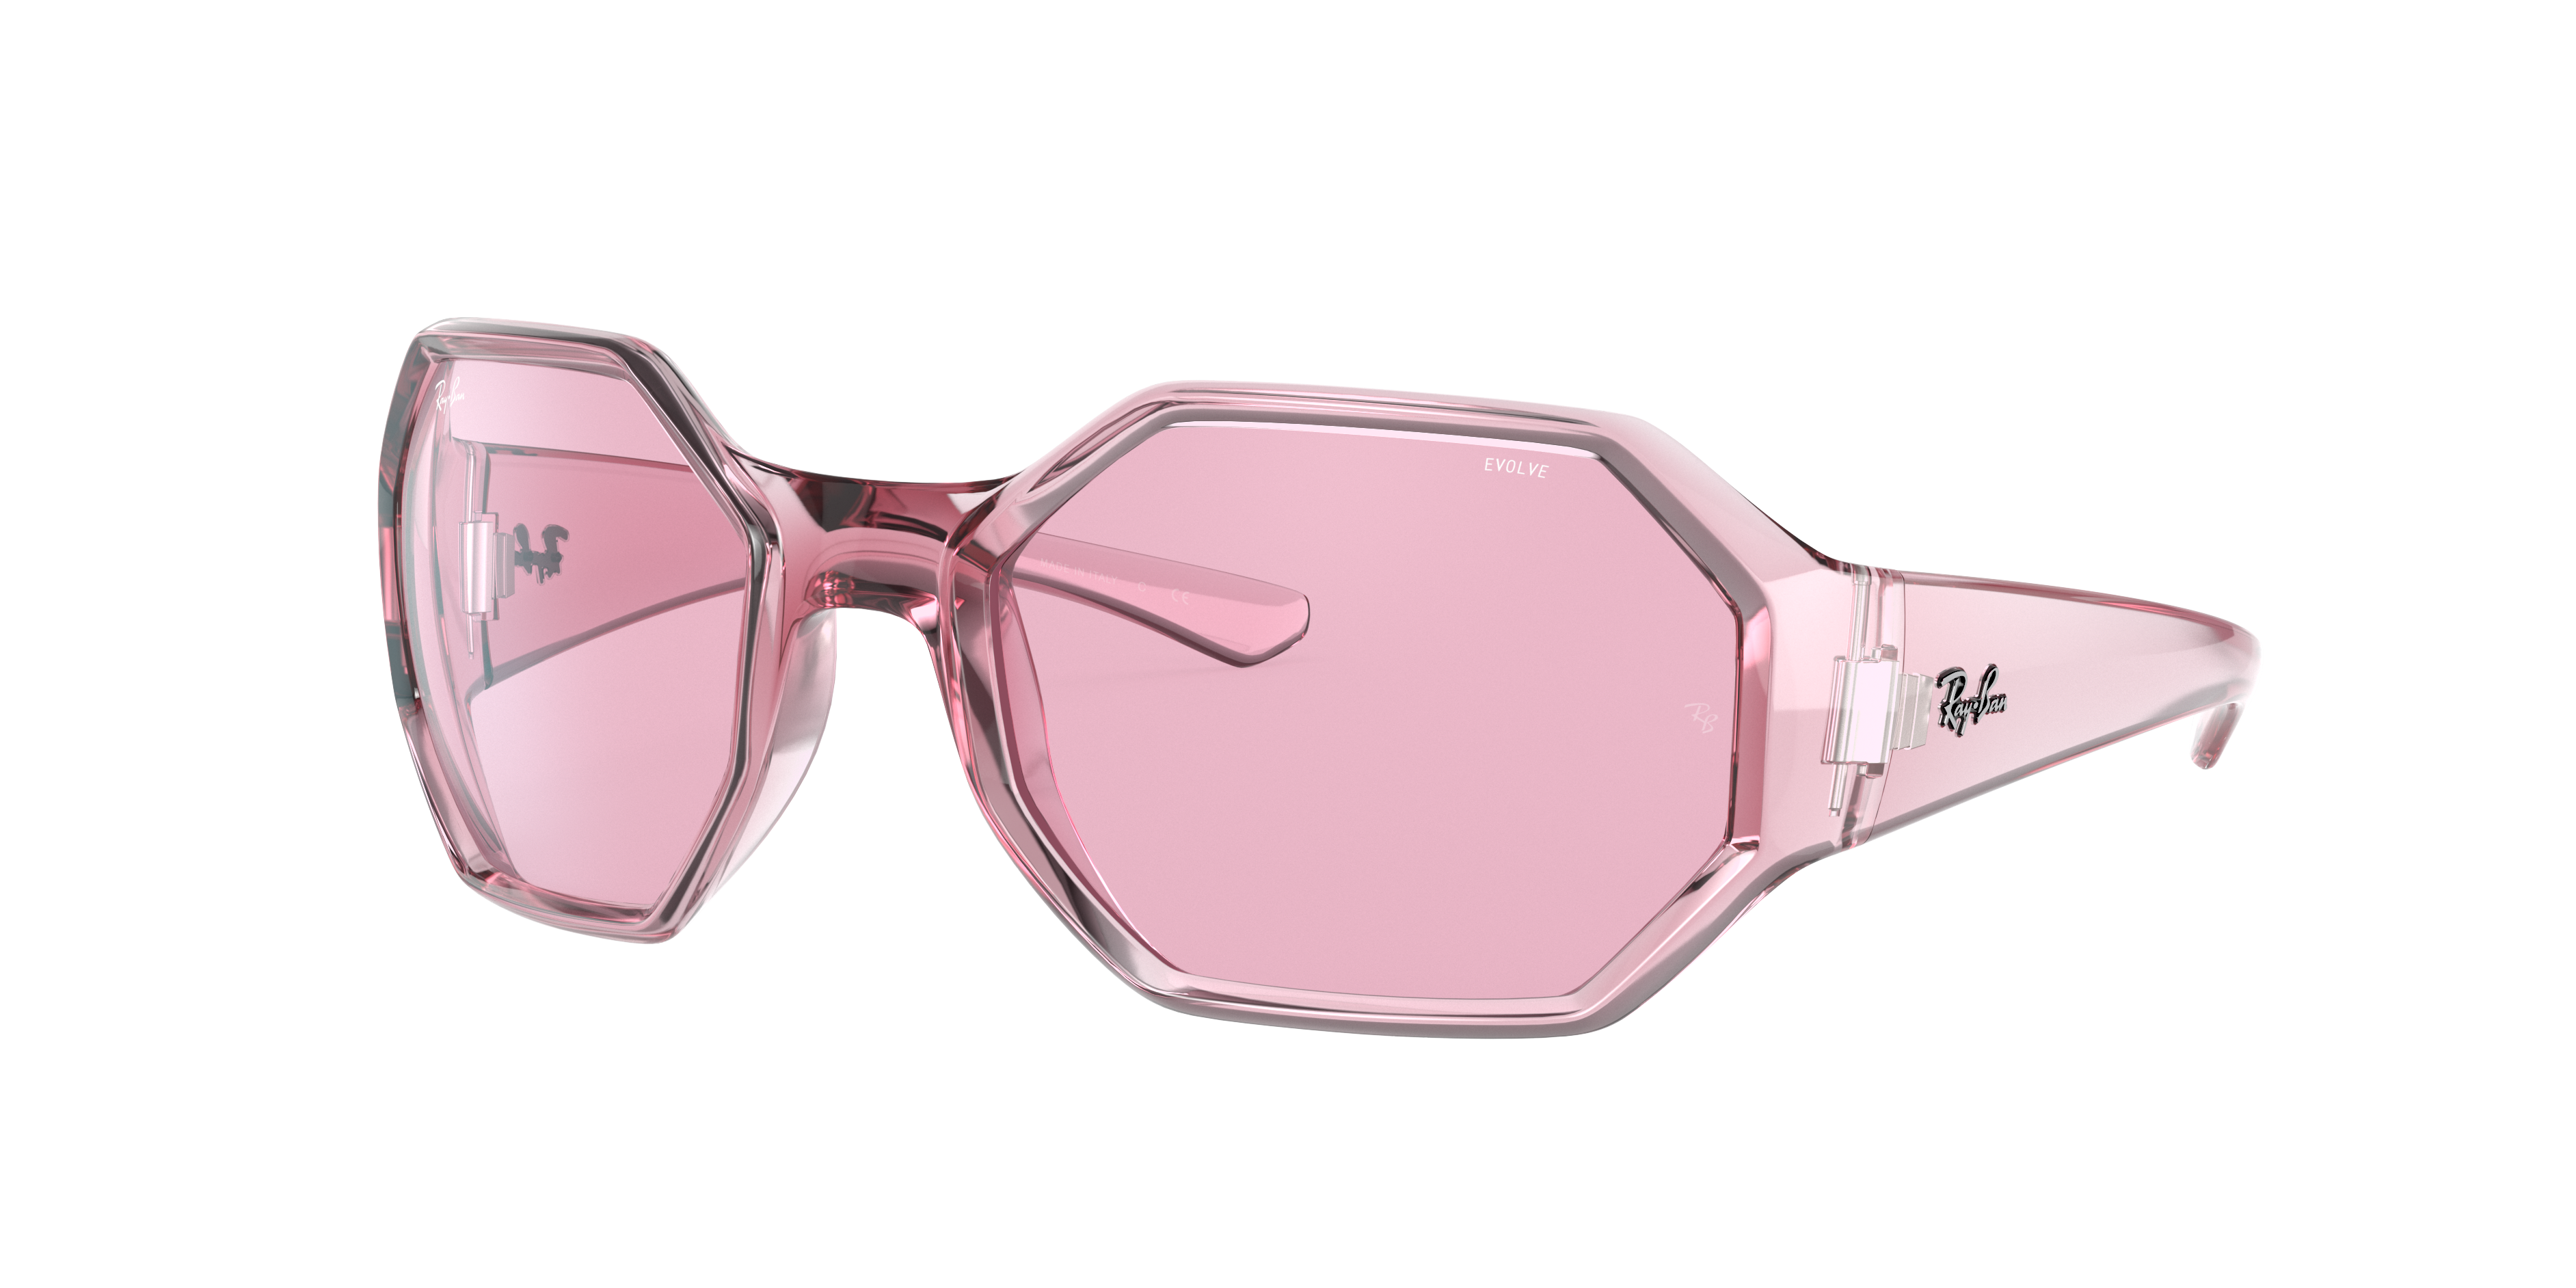 Rb4337 Evolve Sunglasses in Transparent Pink and Pink Photochromic | Ray-Ban ®